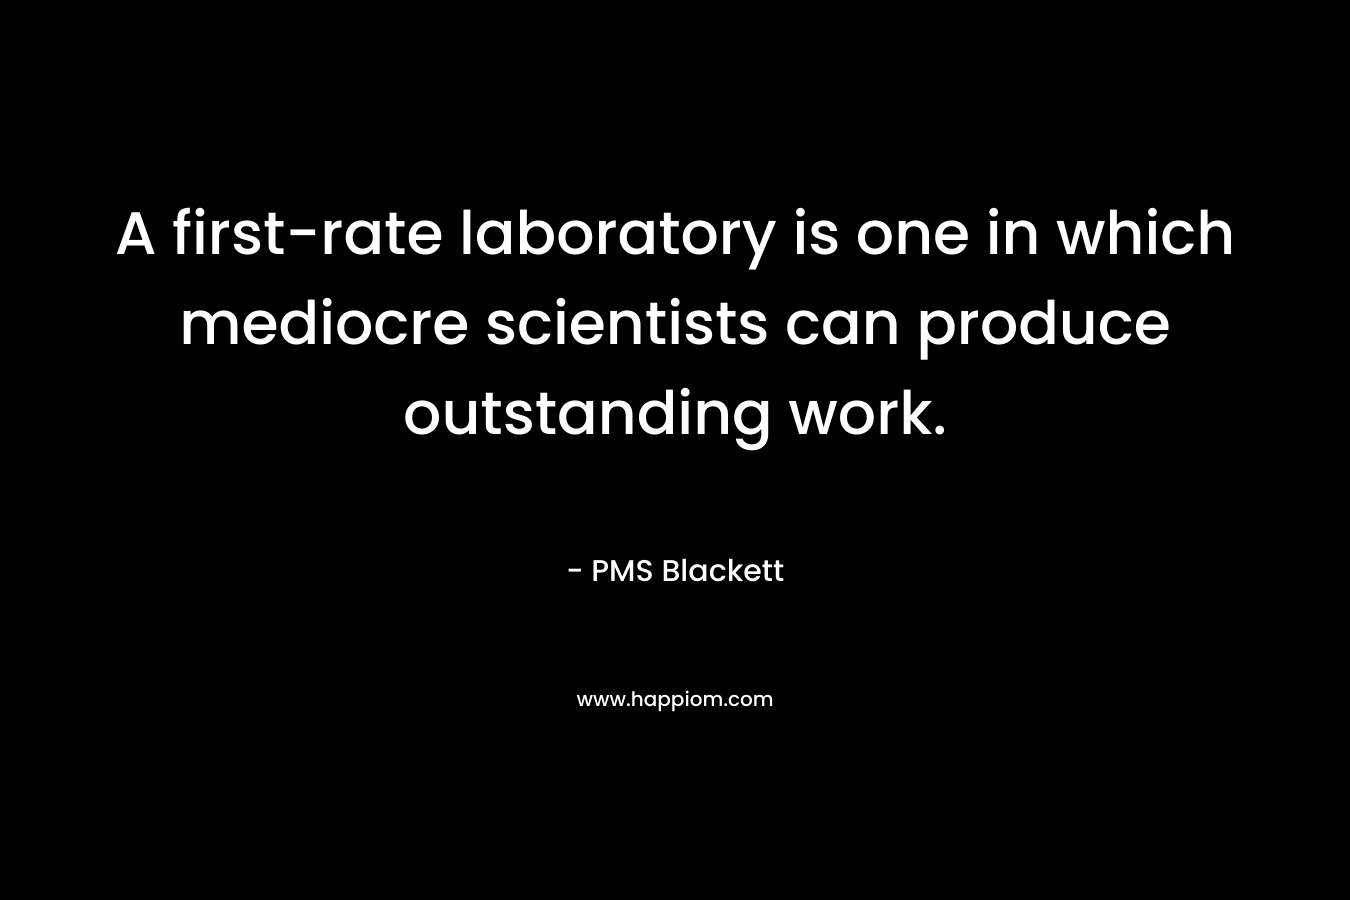 A first-rate laboratory is one in which mediocre scientists can produce outstanding work. – PMS Blackett